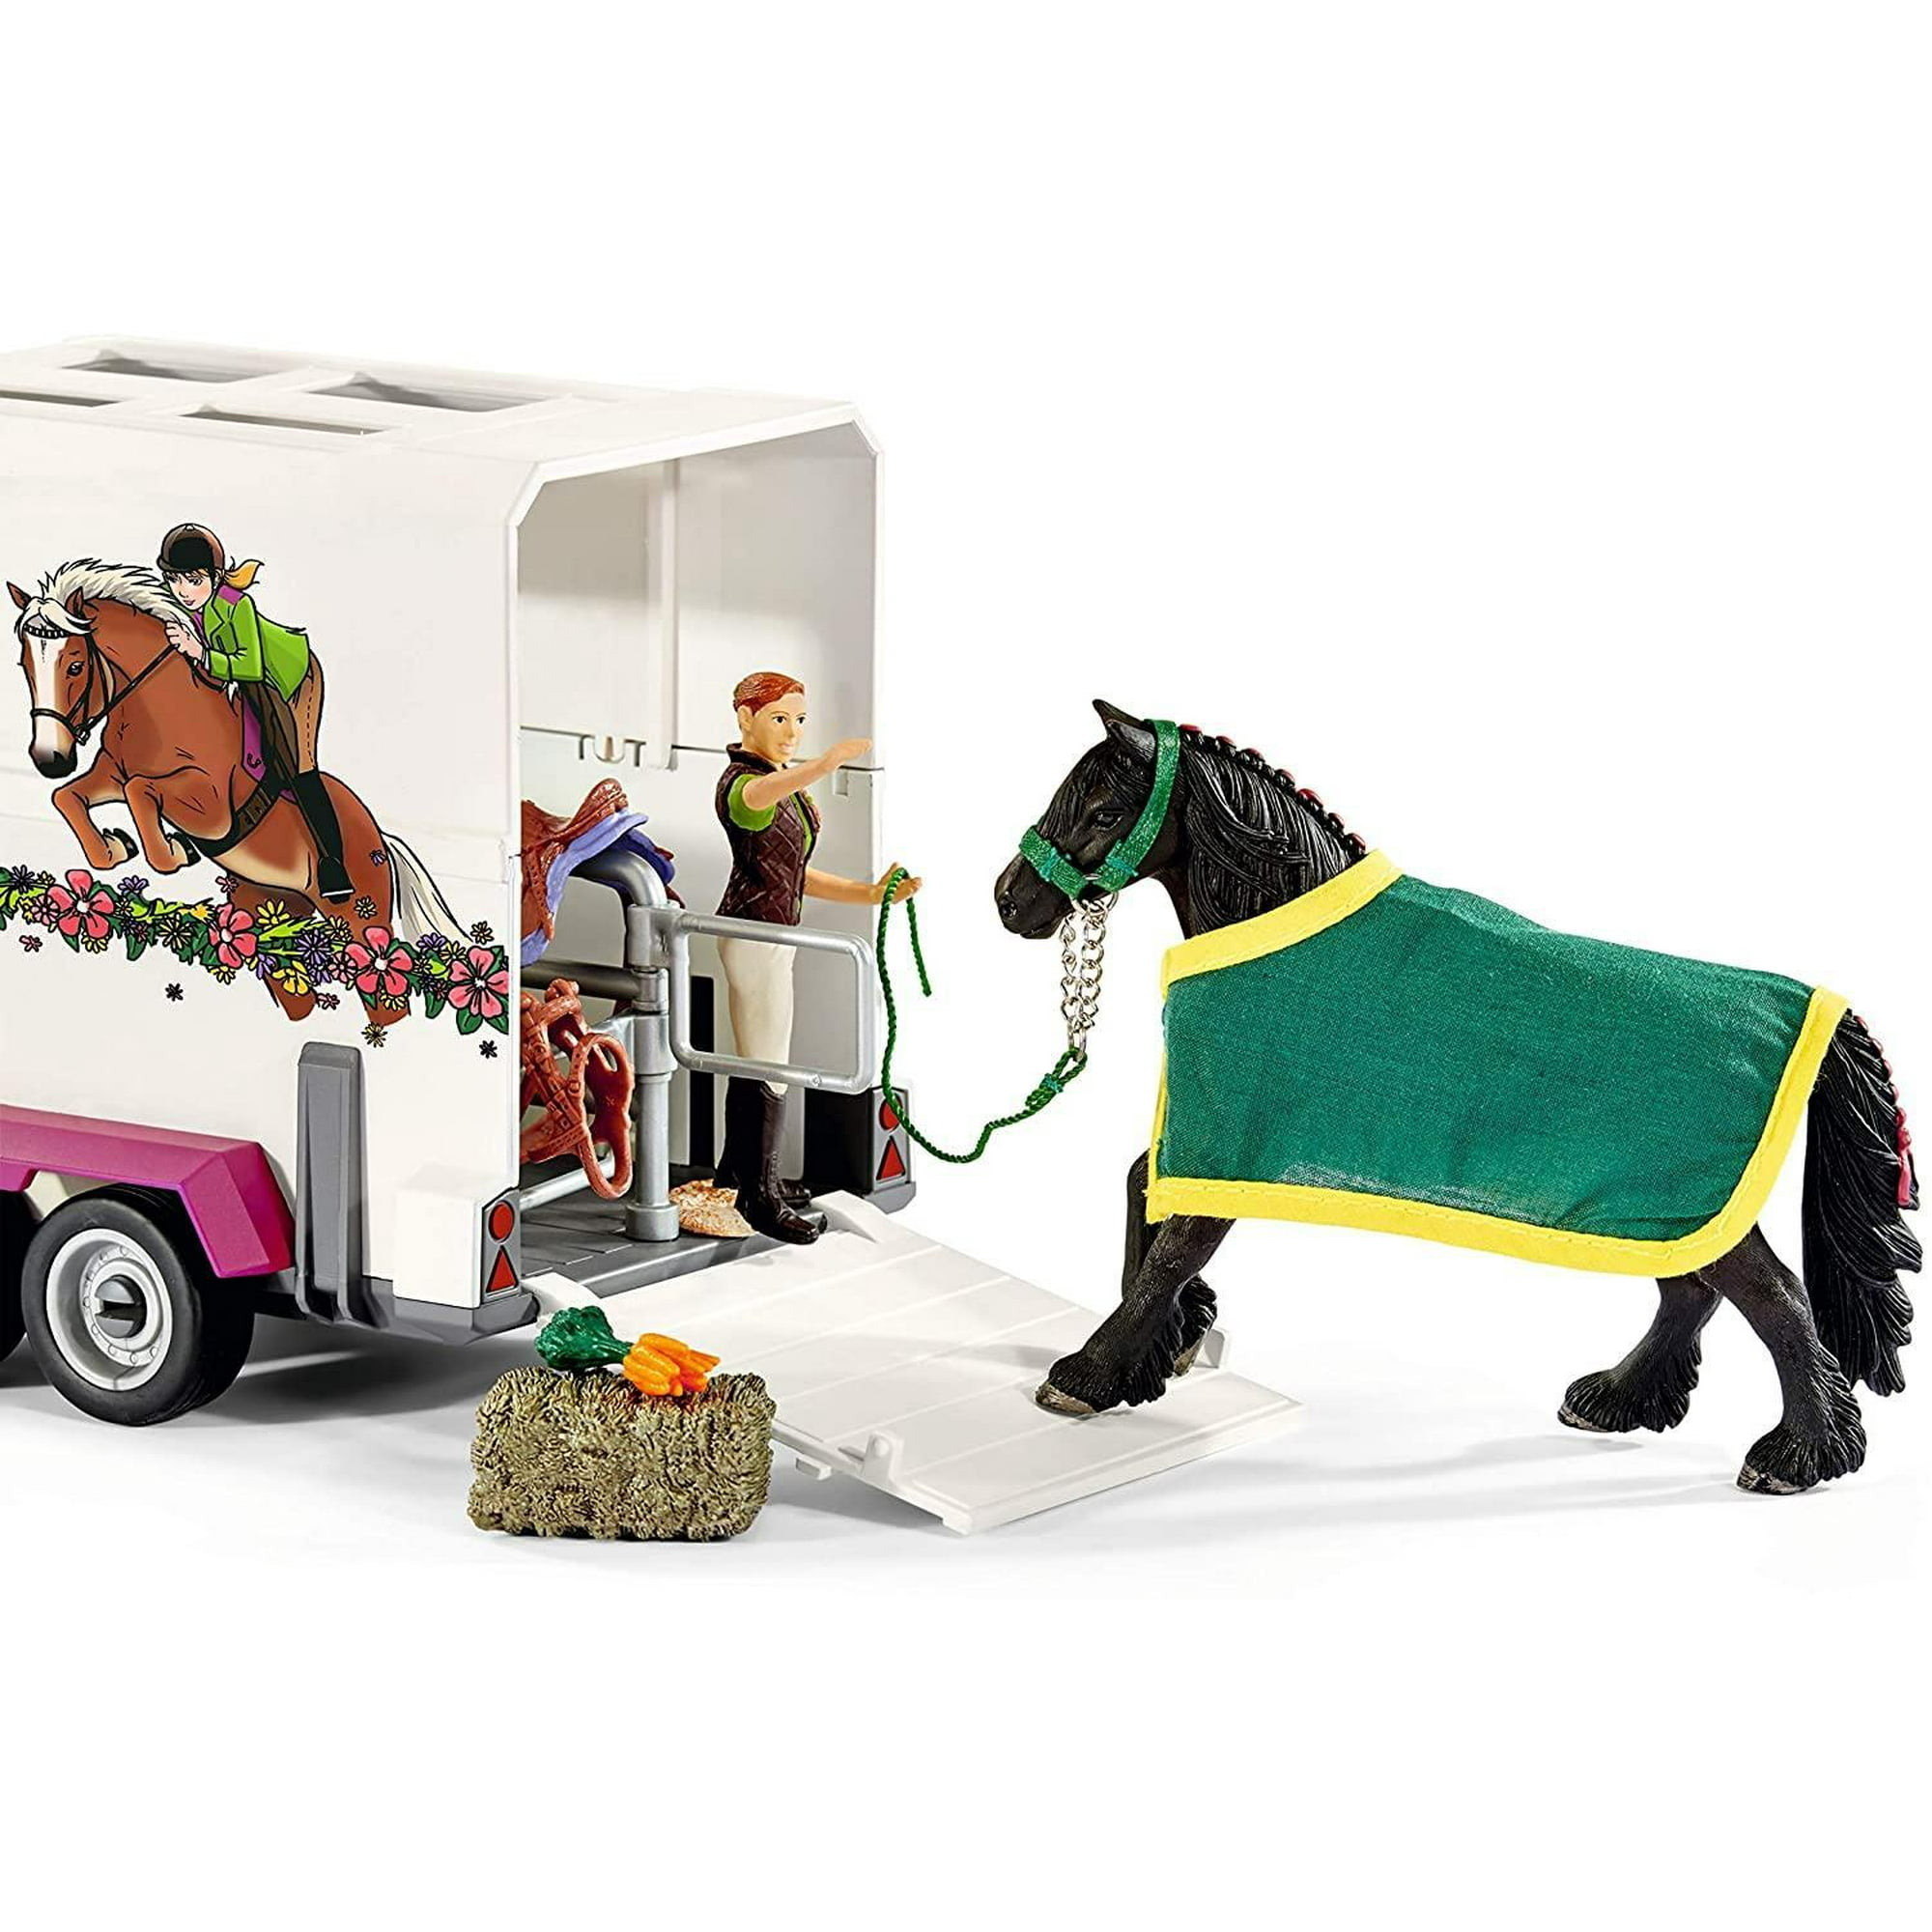 Schleich North America 240005 Horse Club Pick-Up with Horse Trailer